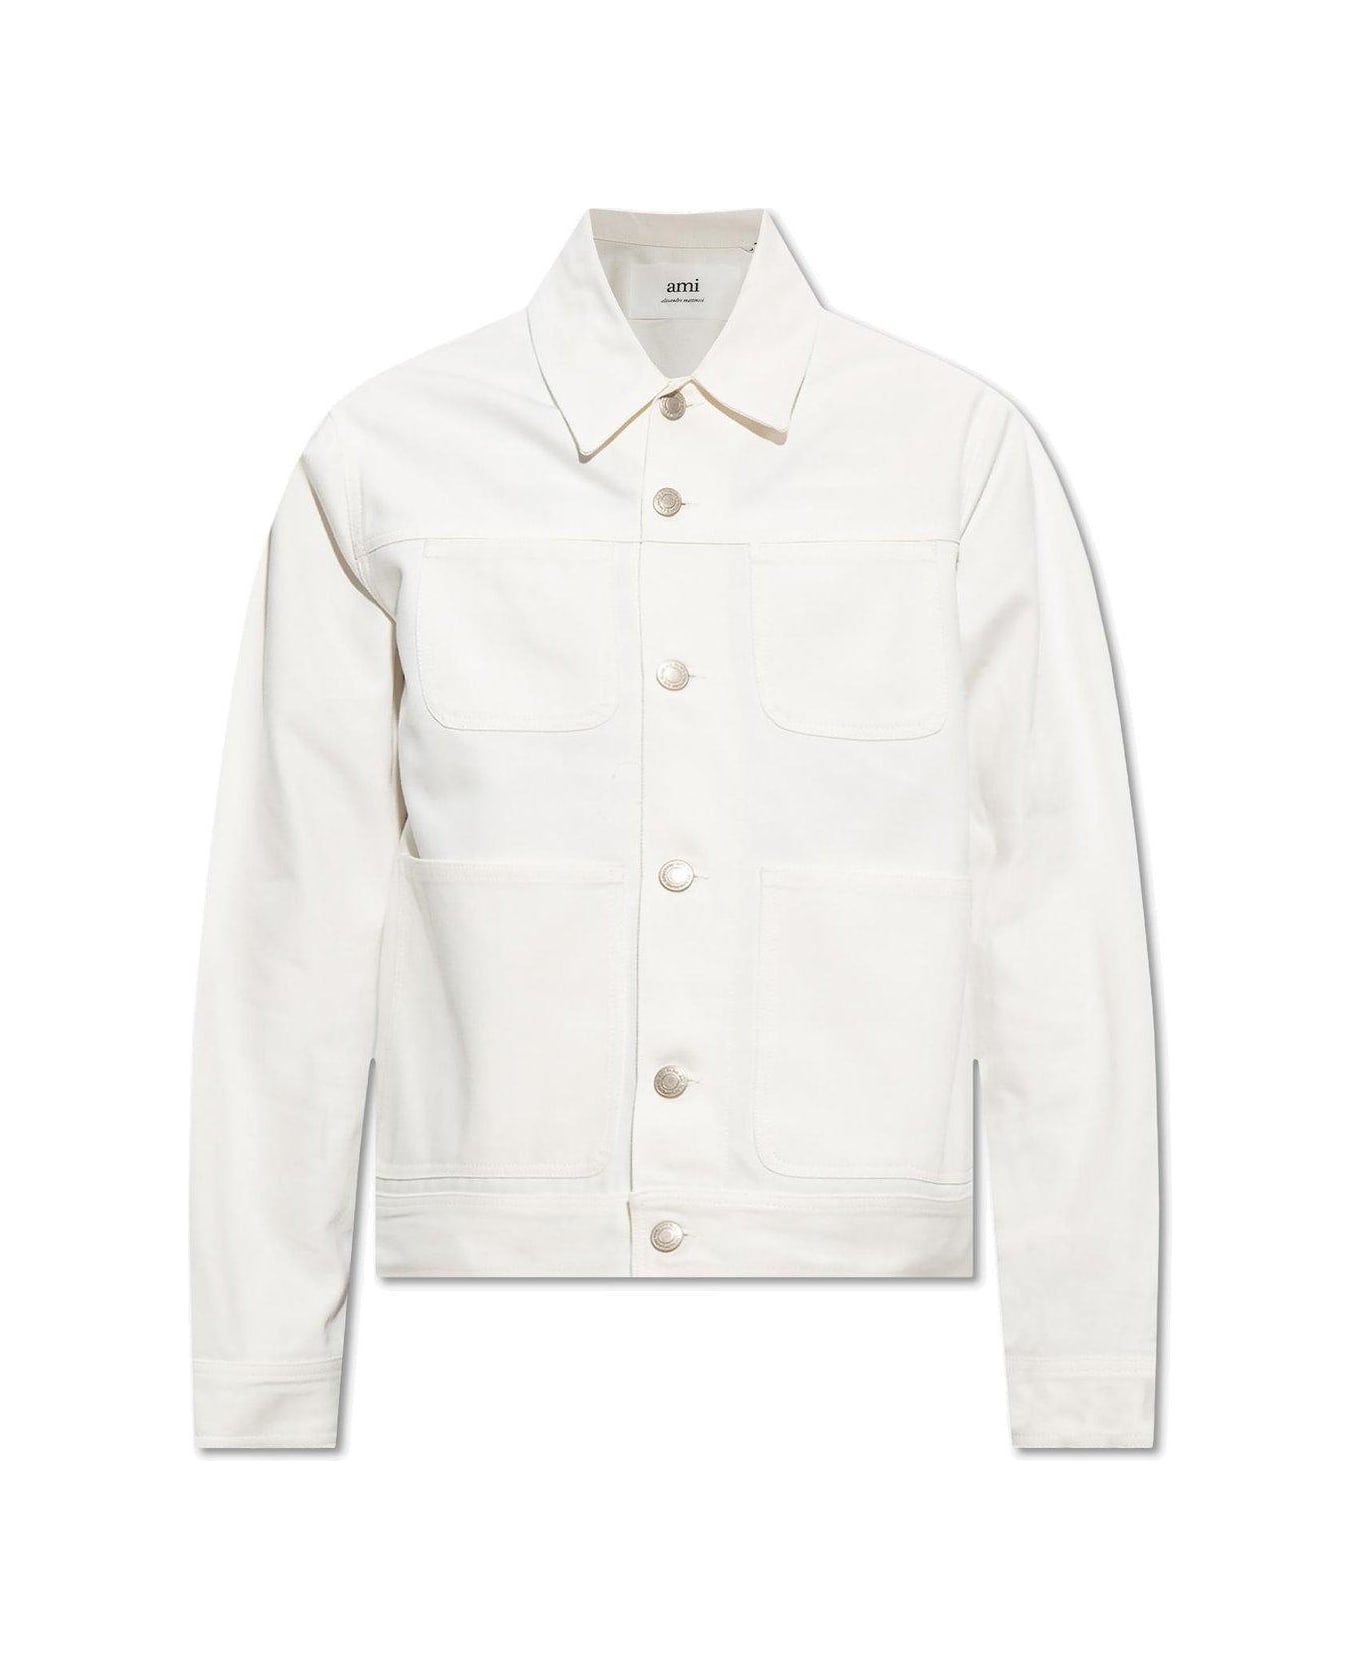 Ami Alexandre Mattiussi Buttoned Long-sleeved Jacket - White